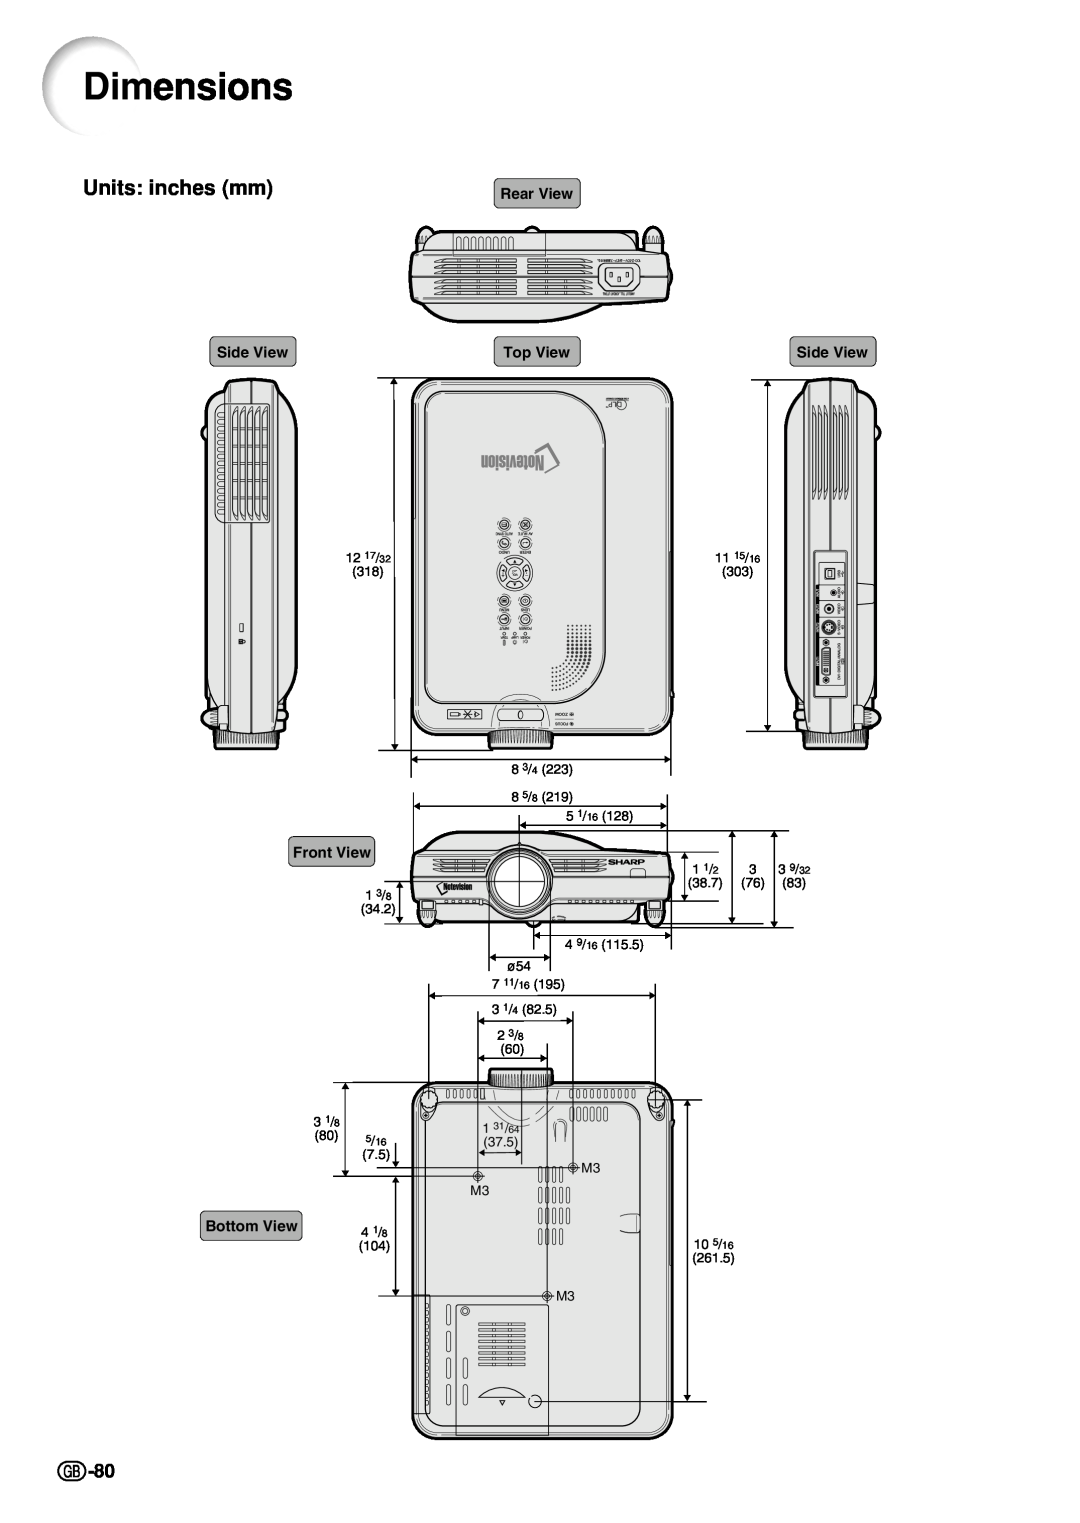 Sharp PG-M20S operation manual Dimensions, Rear View, Side View, Top View, Front View, Bottom View 